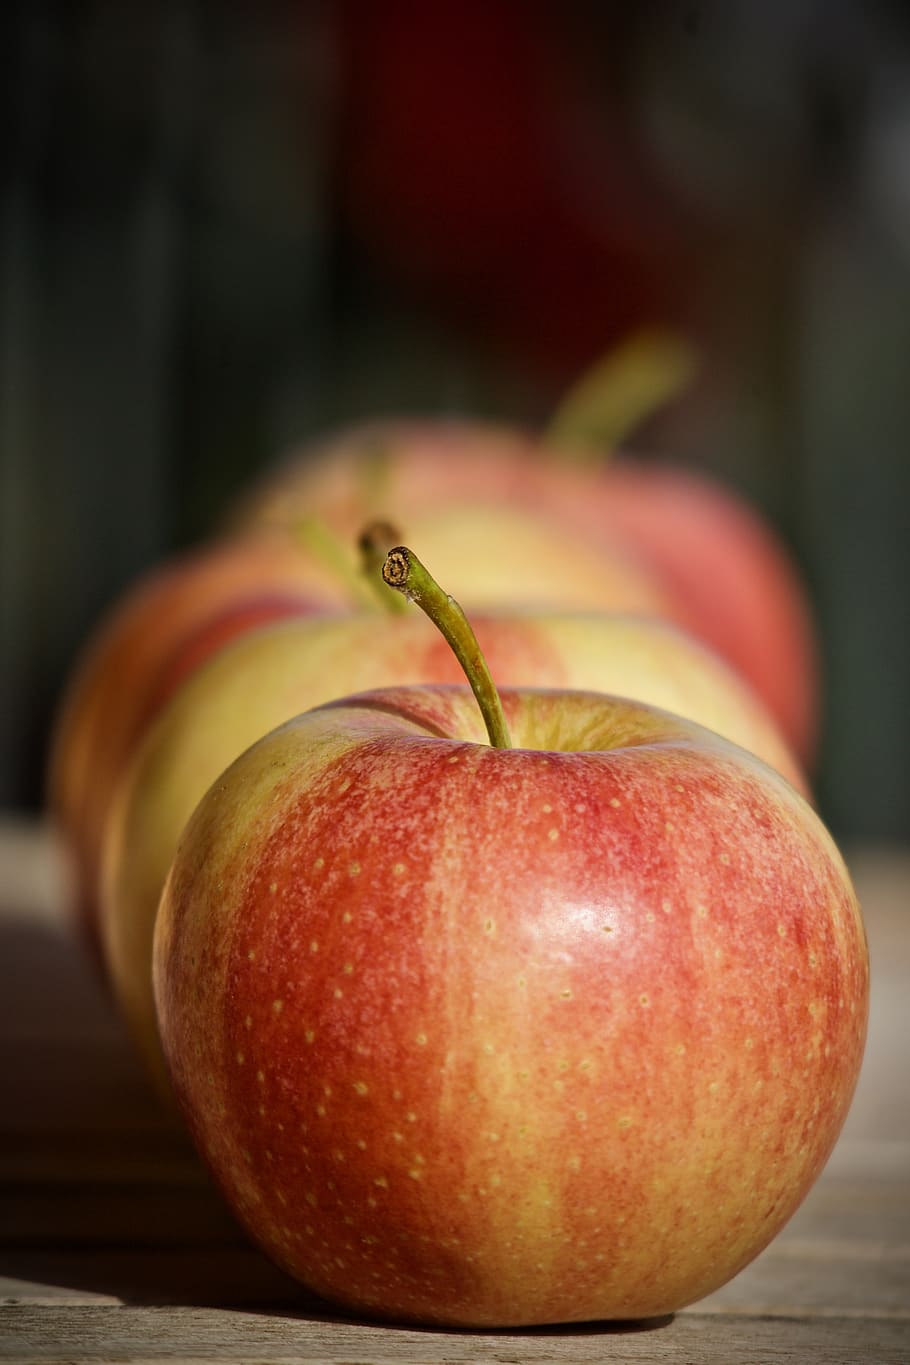 apples, fruit, autumn, red apples, food, delicious, vitamins, in a row, tasty, bio